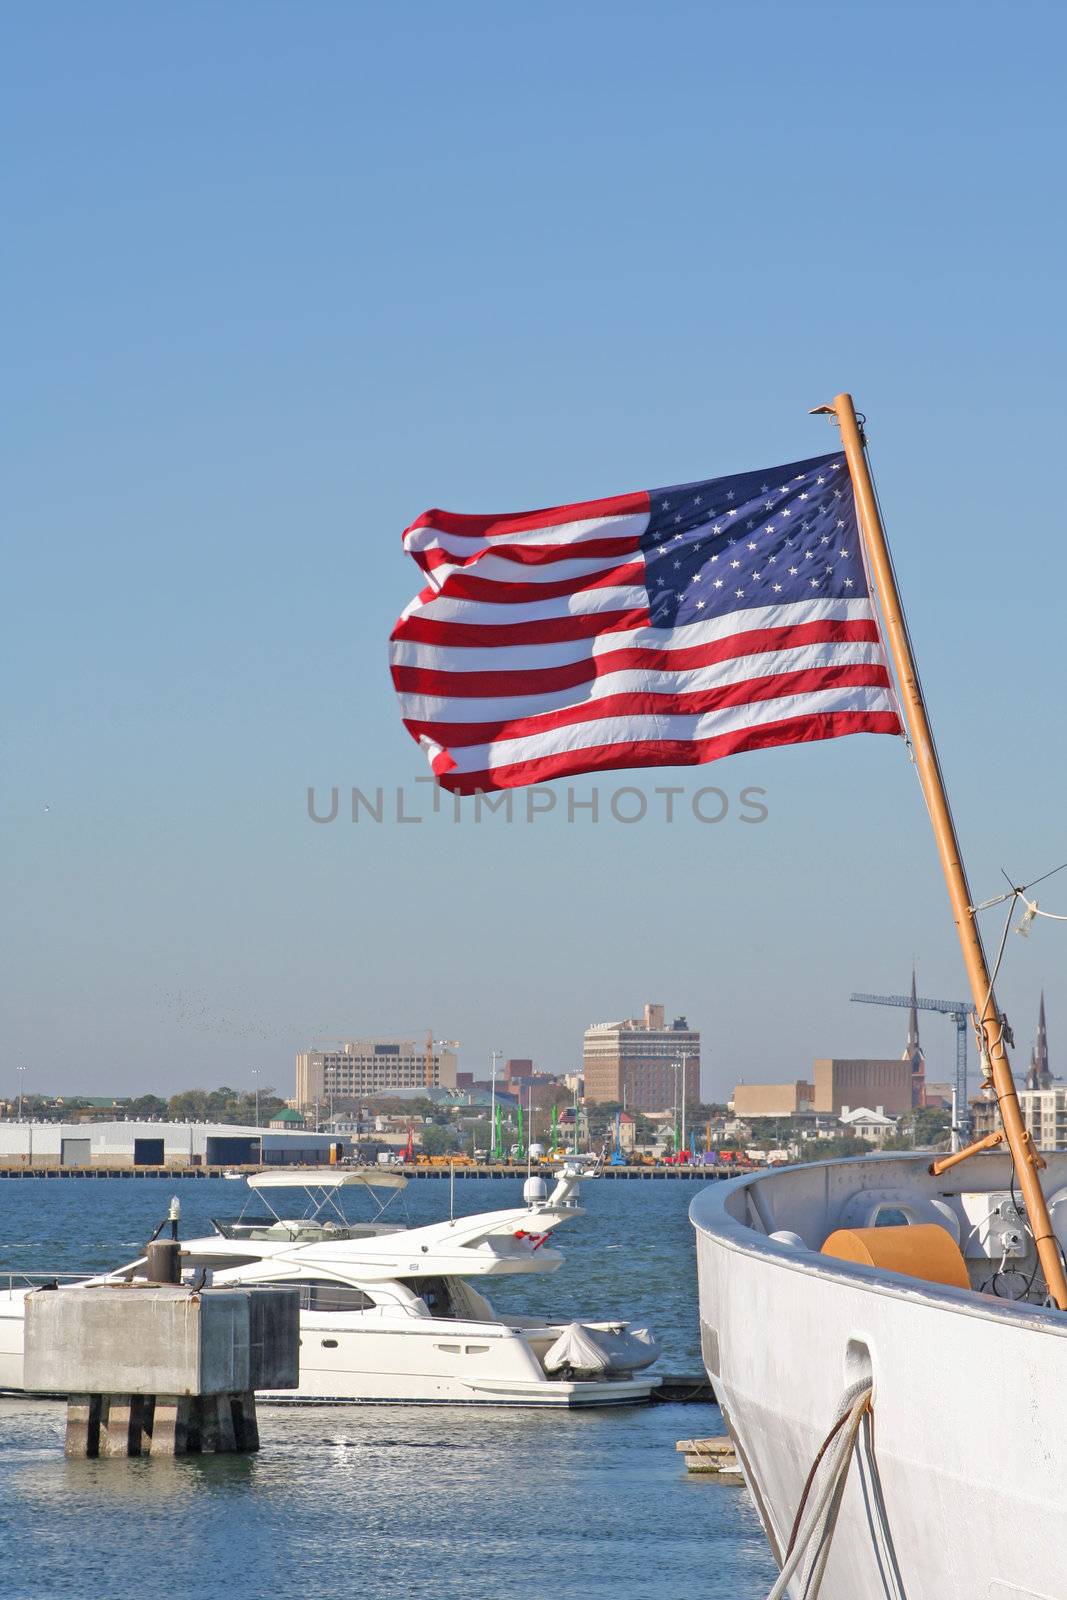 US flag on the yacht background